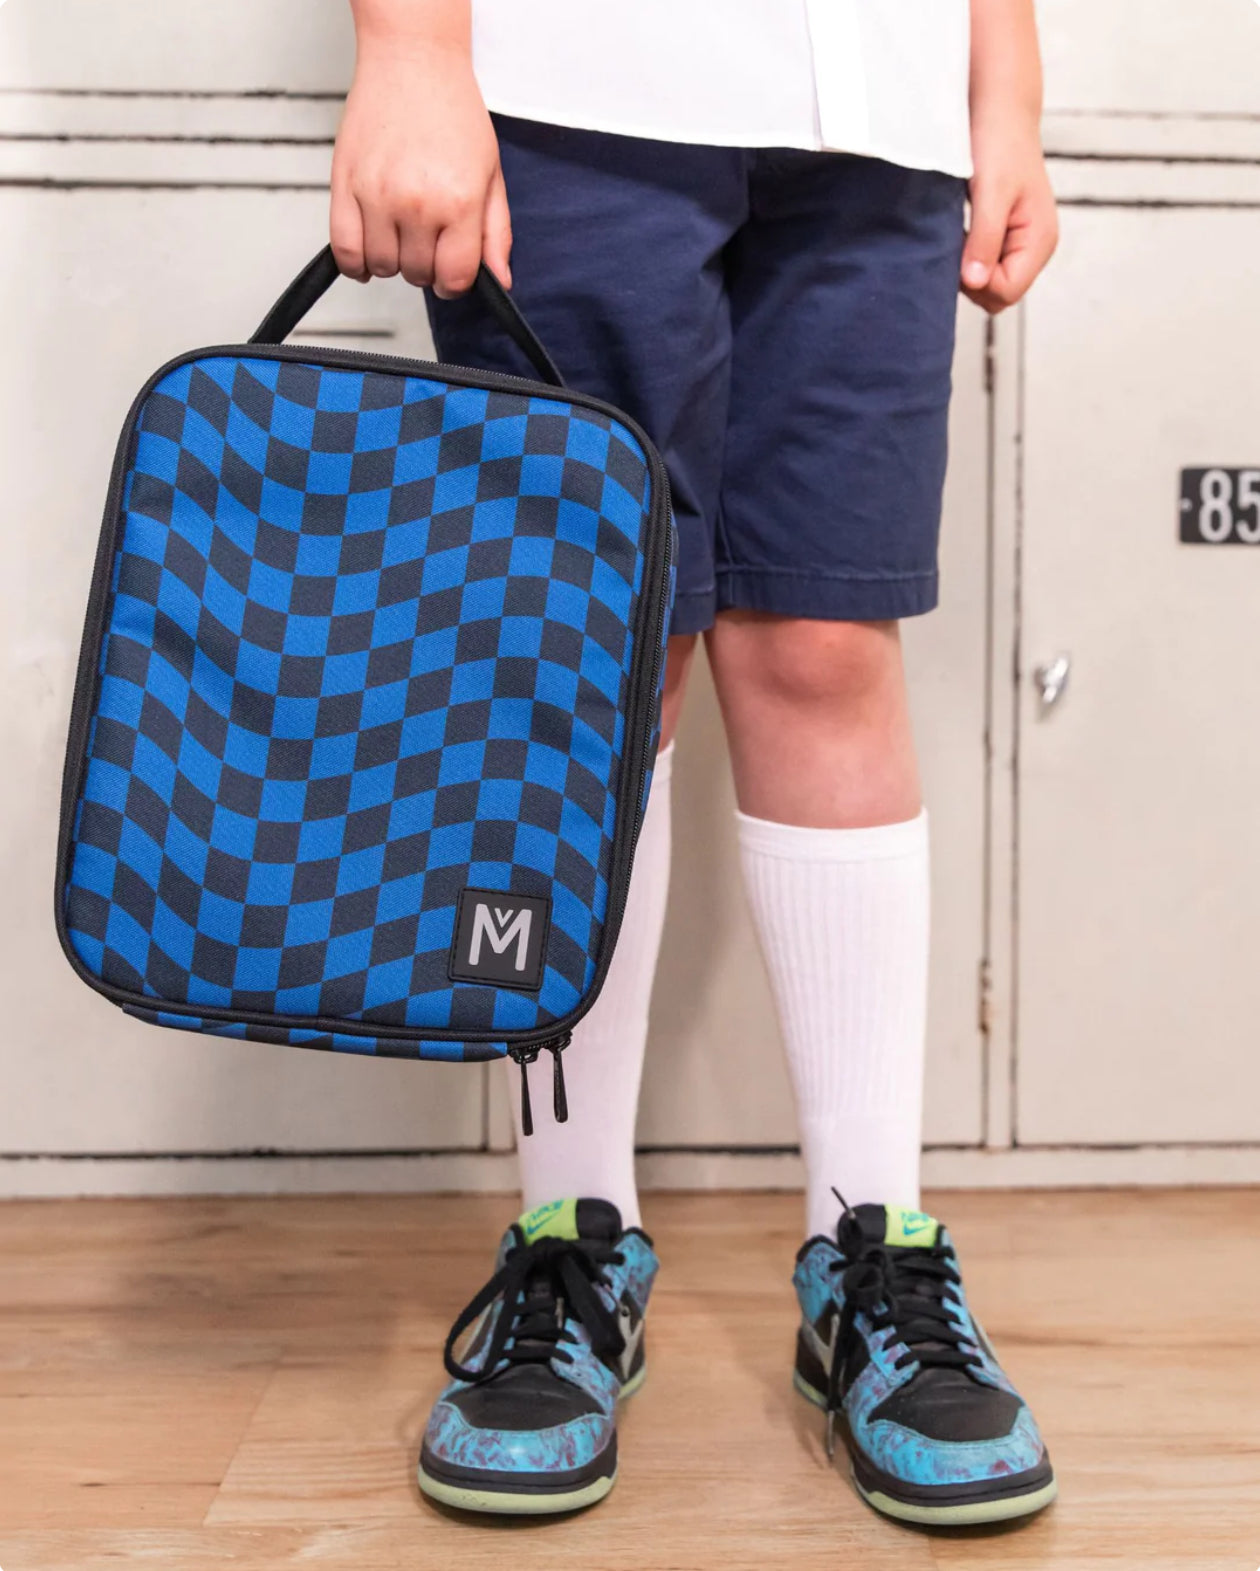 Insulated lunch bag - Retro check / Large